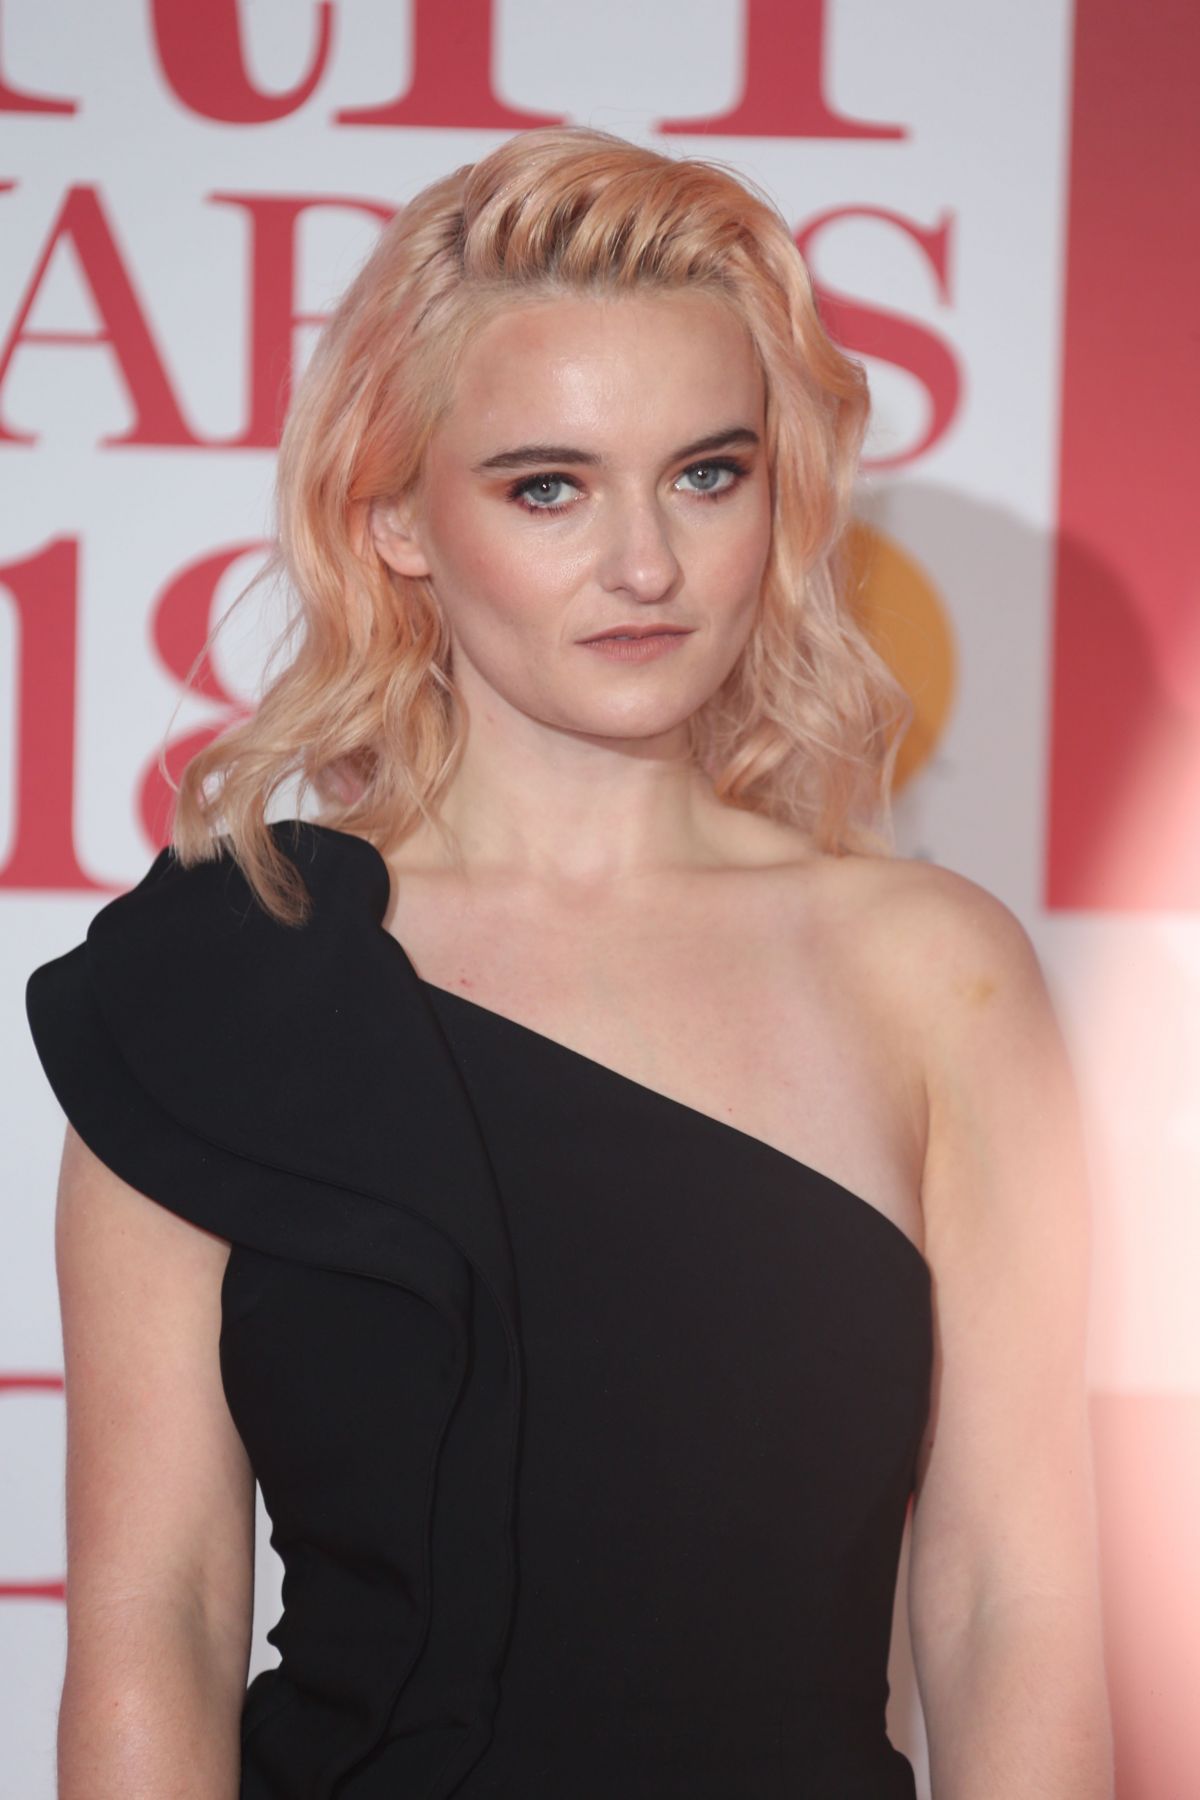 GRACE CHATTO at Brit Awards 2018 in London 02/21/2018 - HawtCelebs